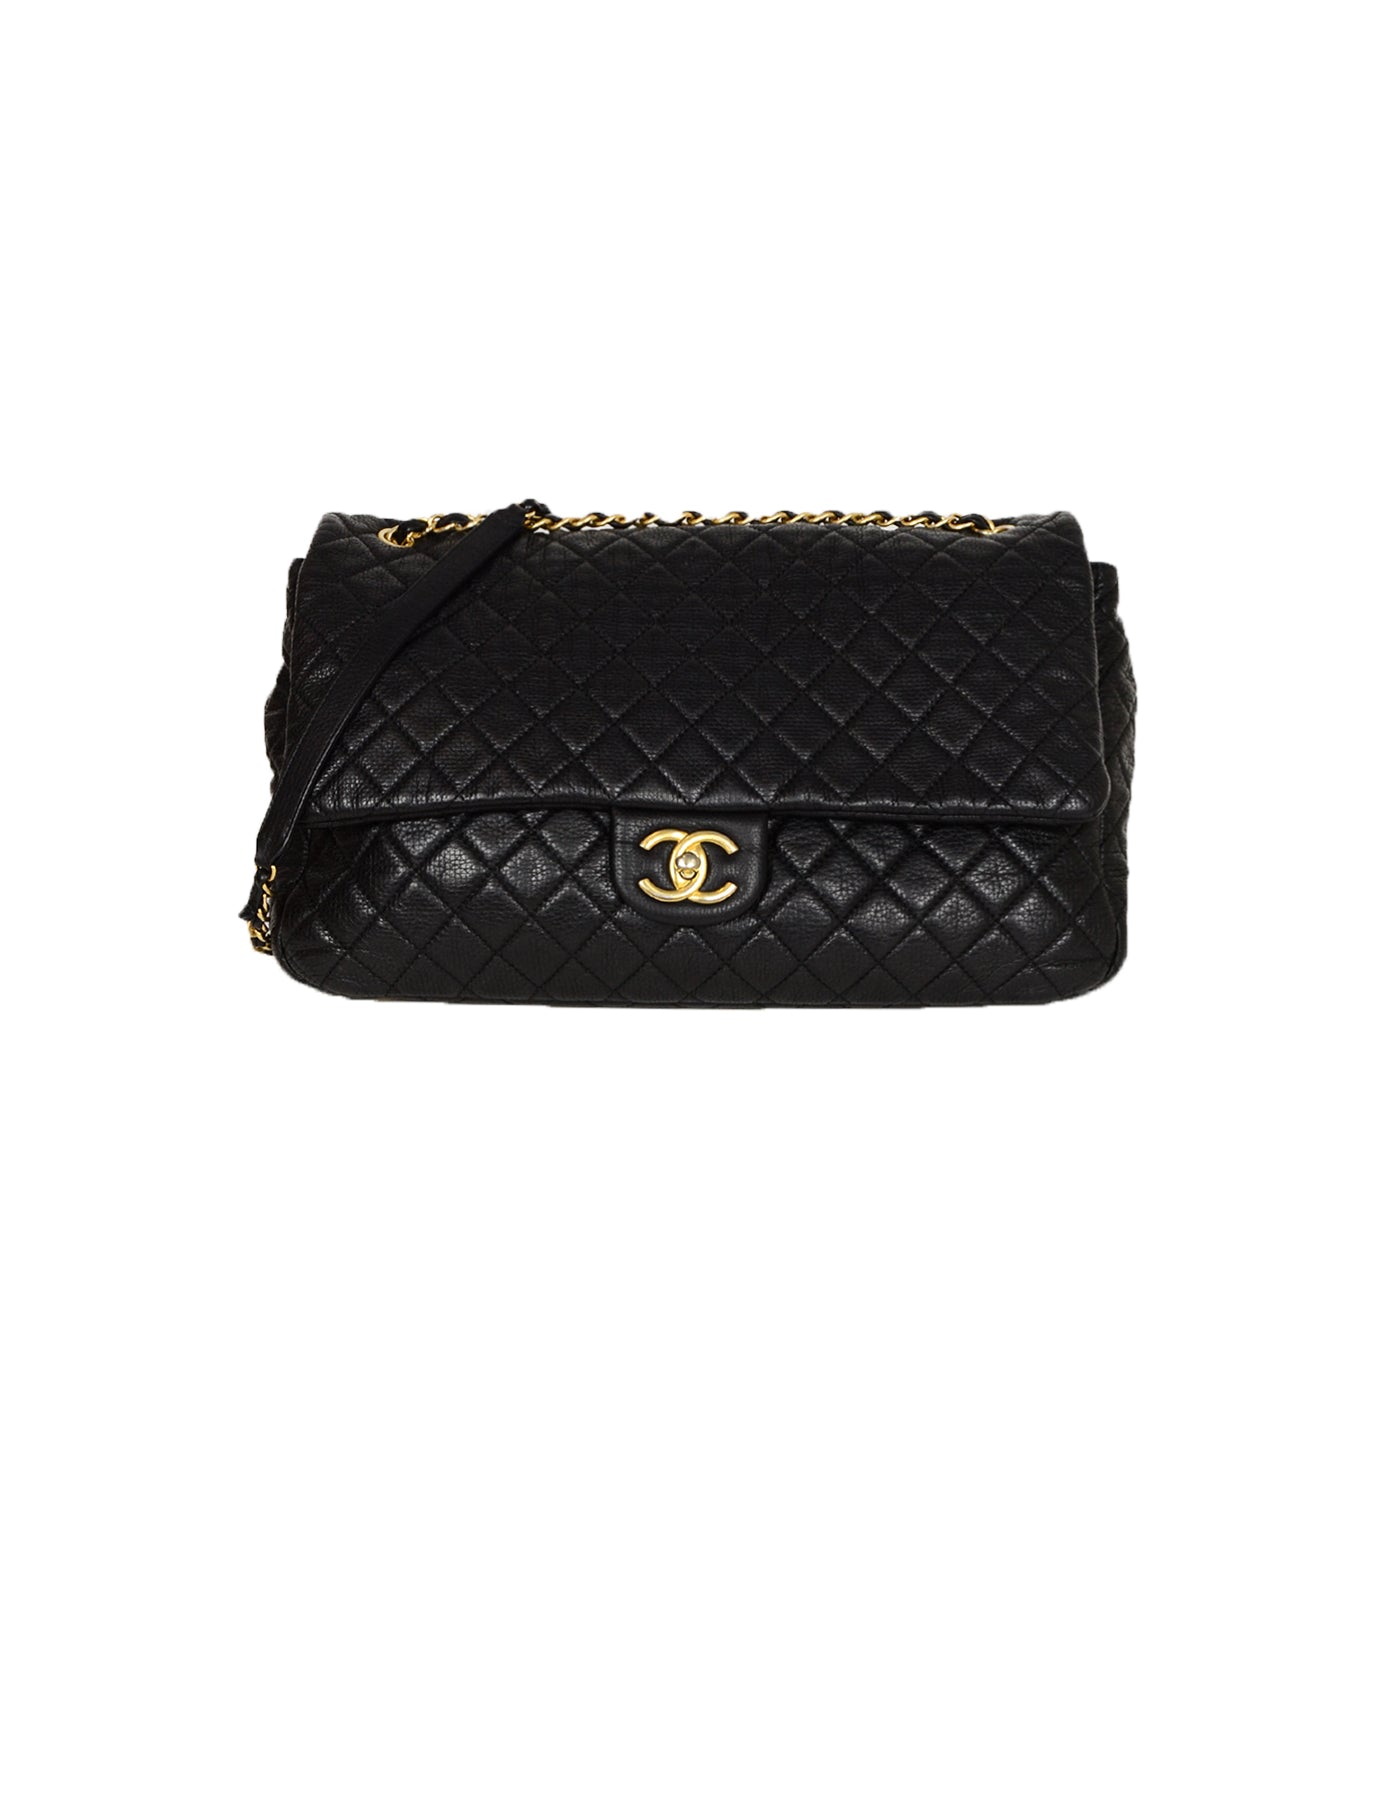 Chanel Black Calfskin Leather Airlines XXL CC Flap Bag